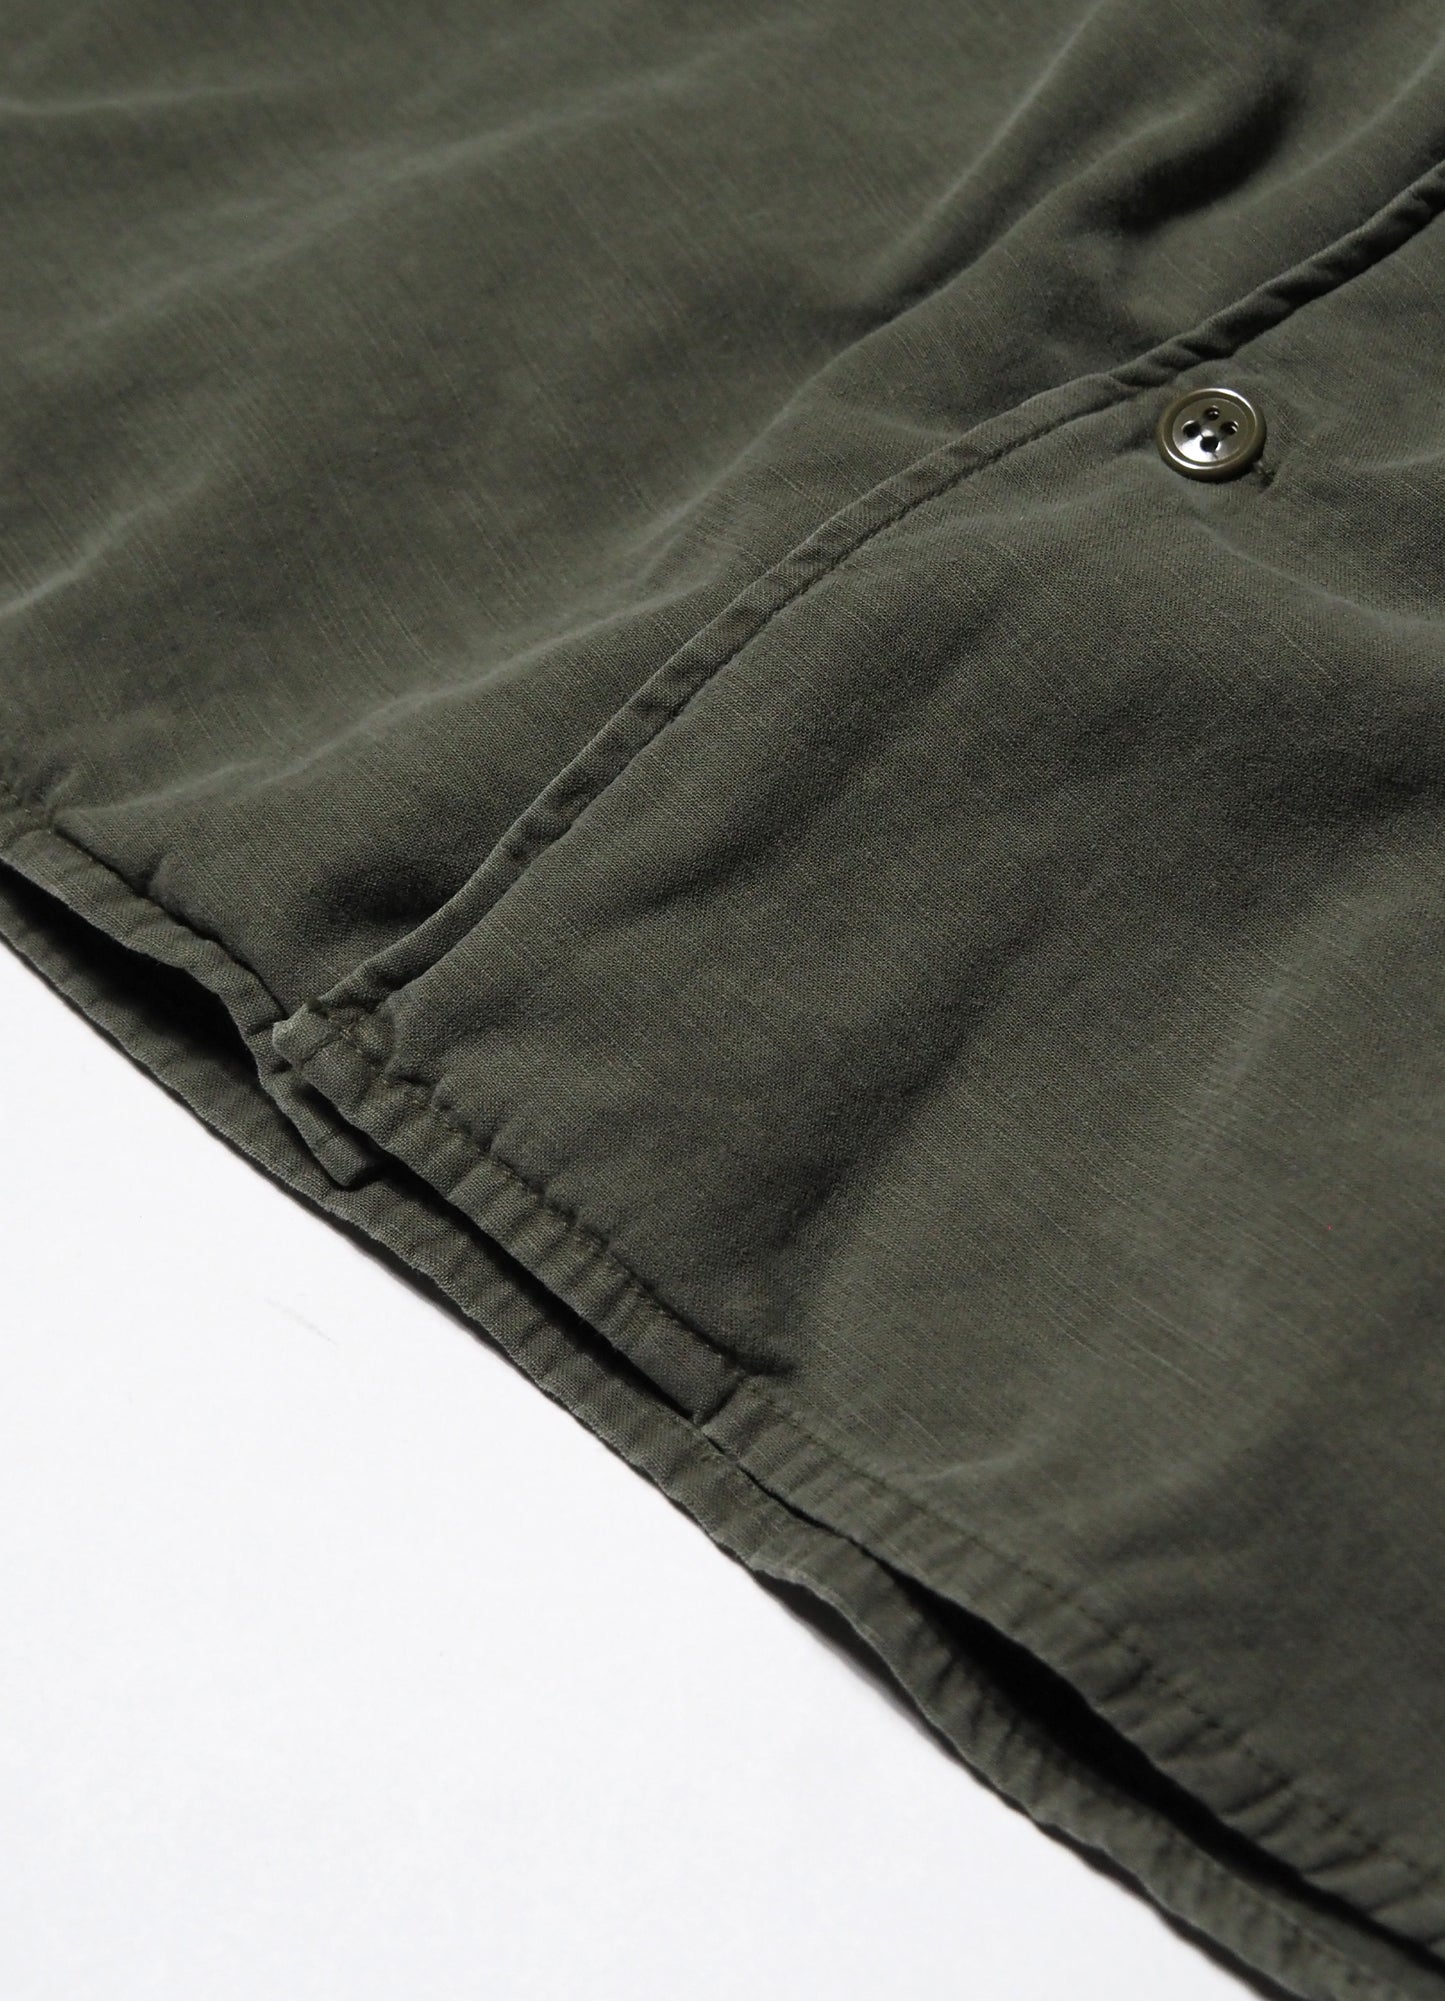 WIDE Military S/S SHIRT [RN26349070]